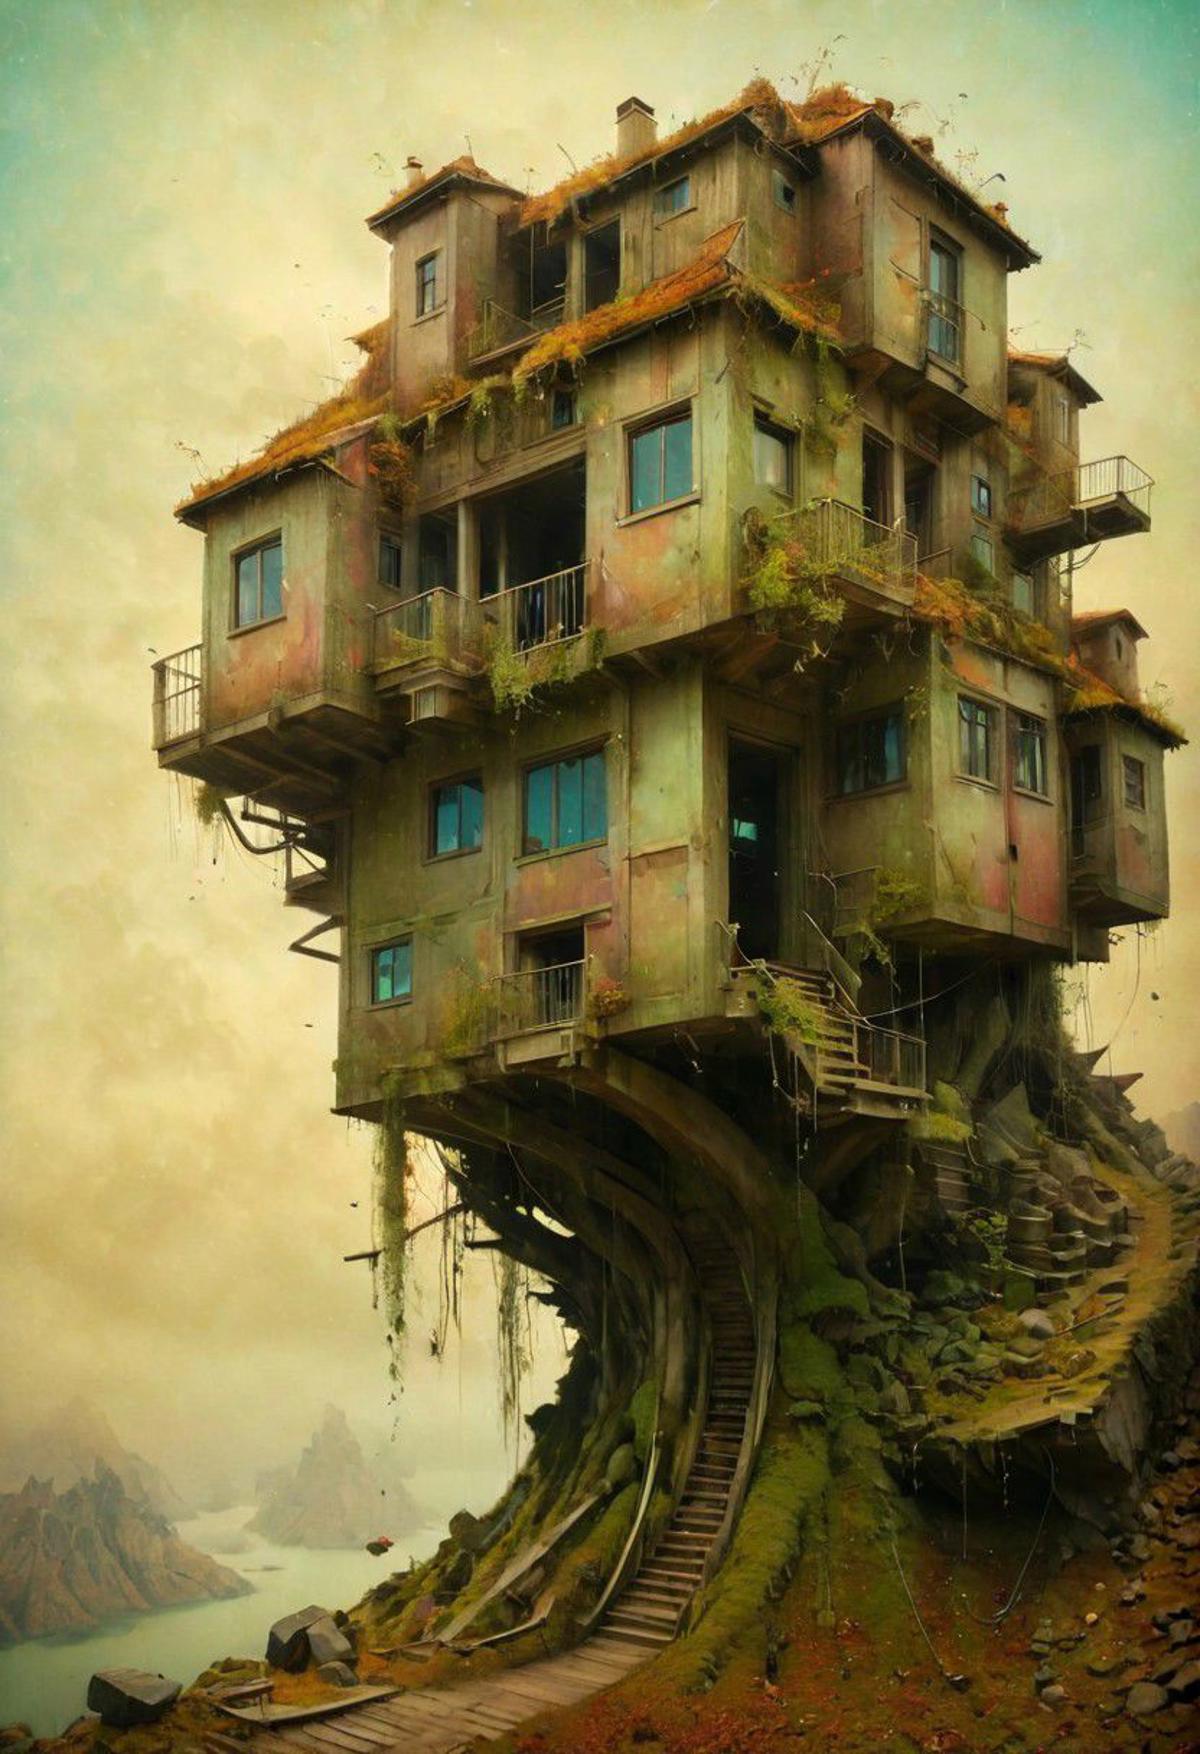 treehouse_XL image by tlscope222